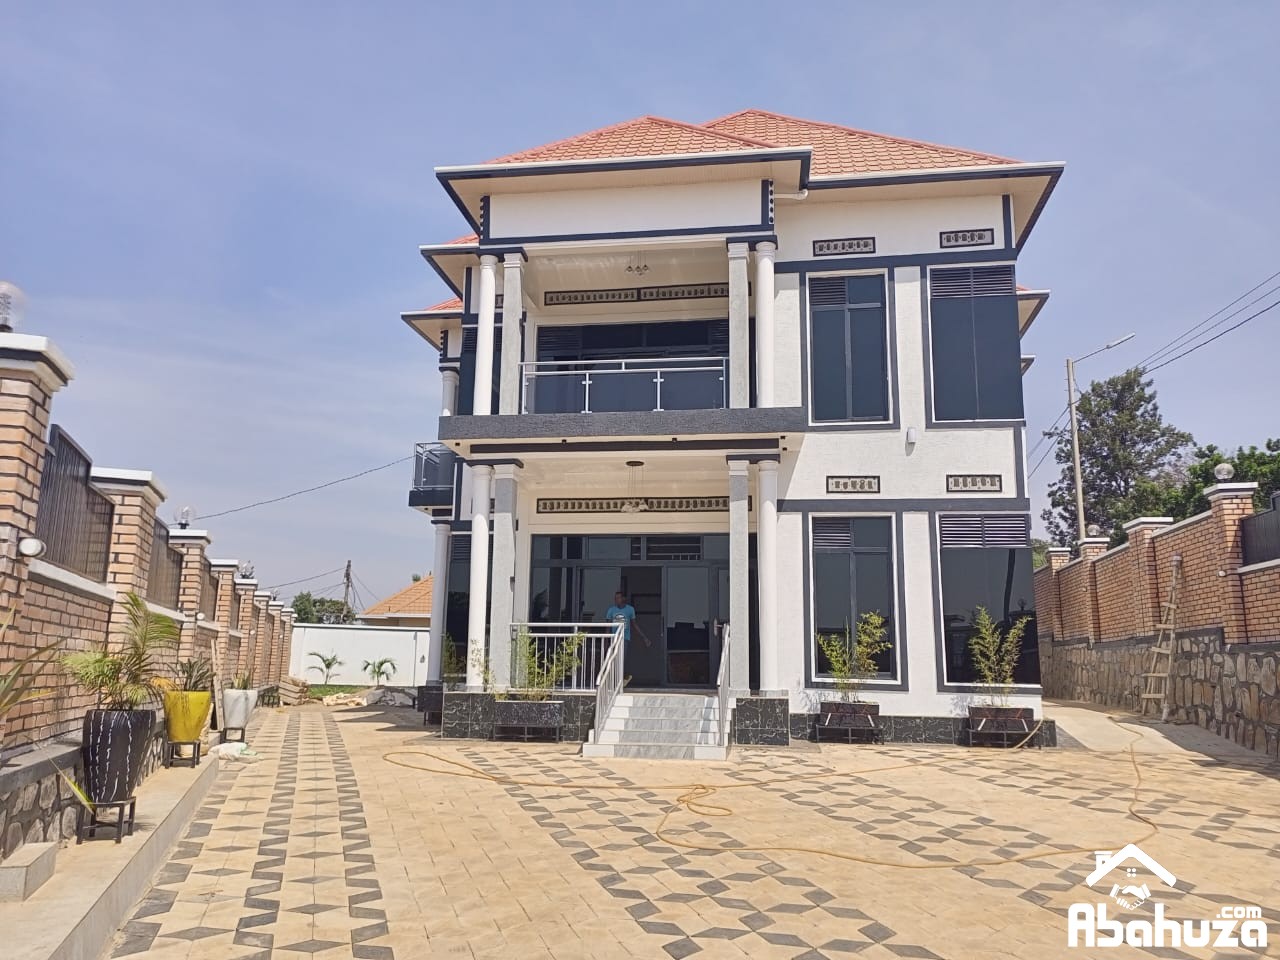 A 6 BEDROOM HOUSE FOR SALE IN KIGALI AT NIBOYE